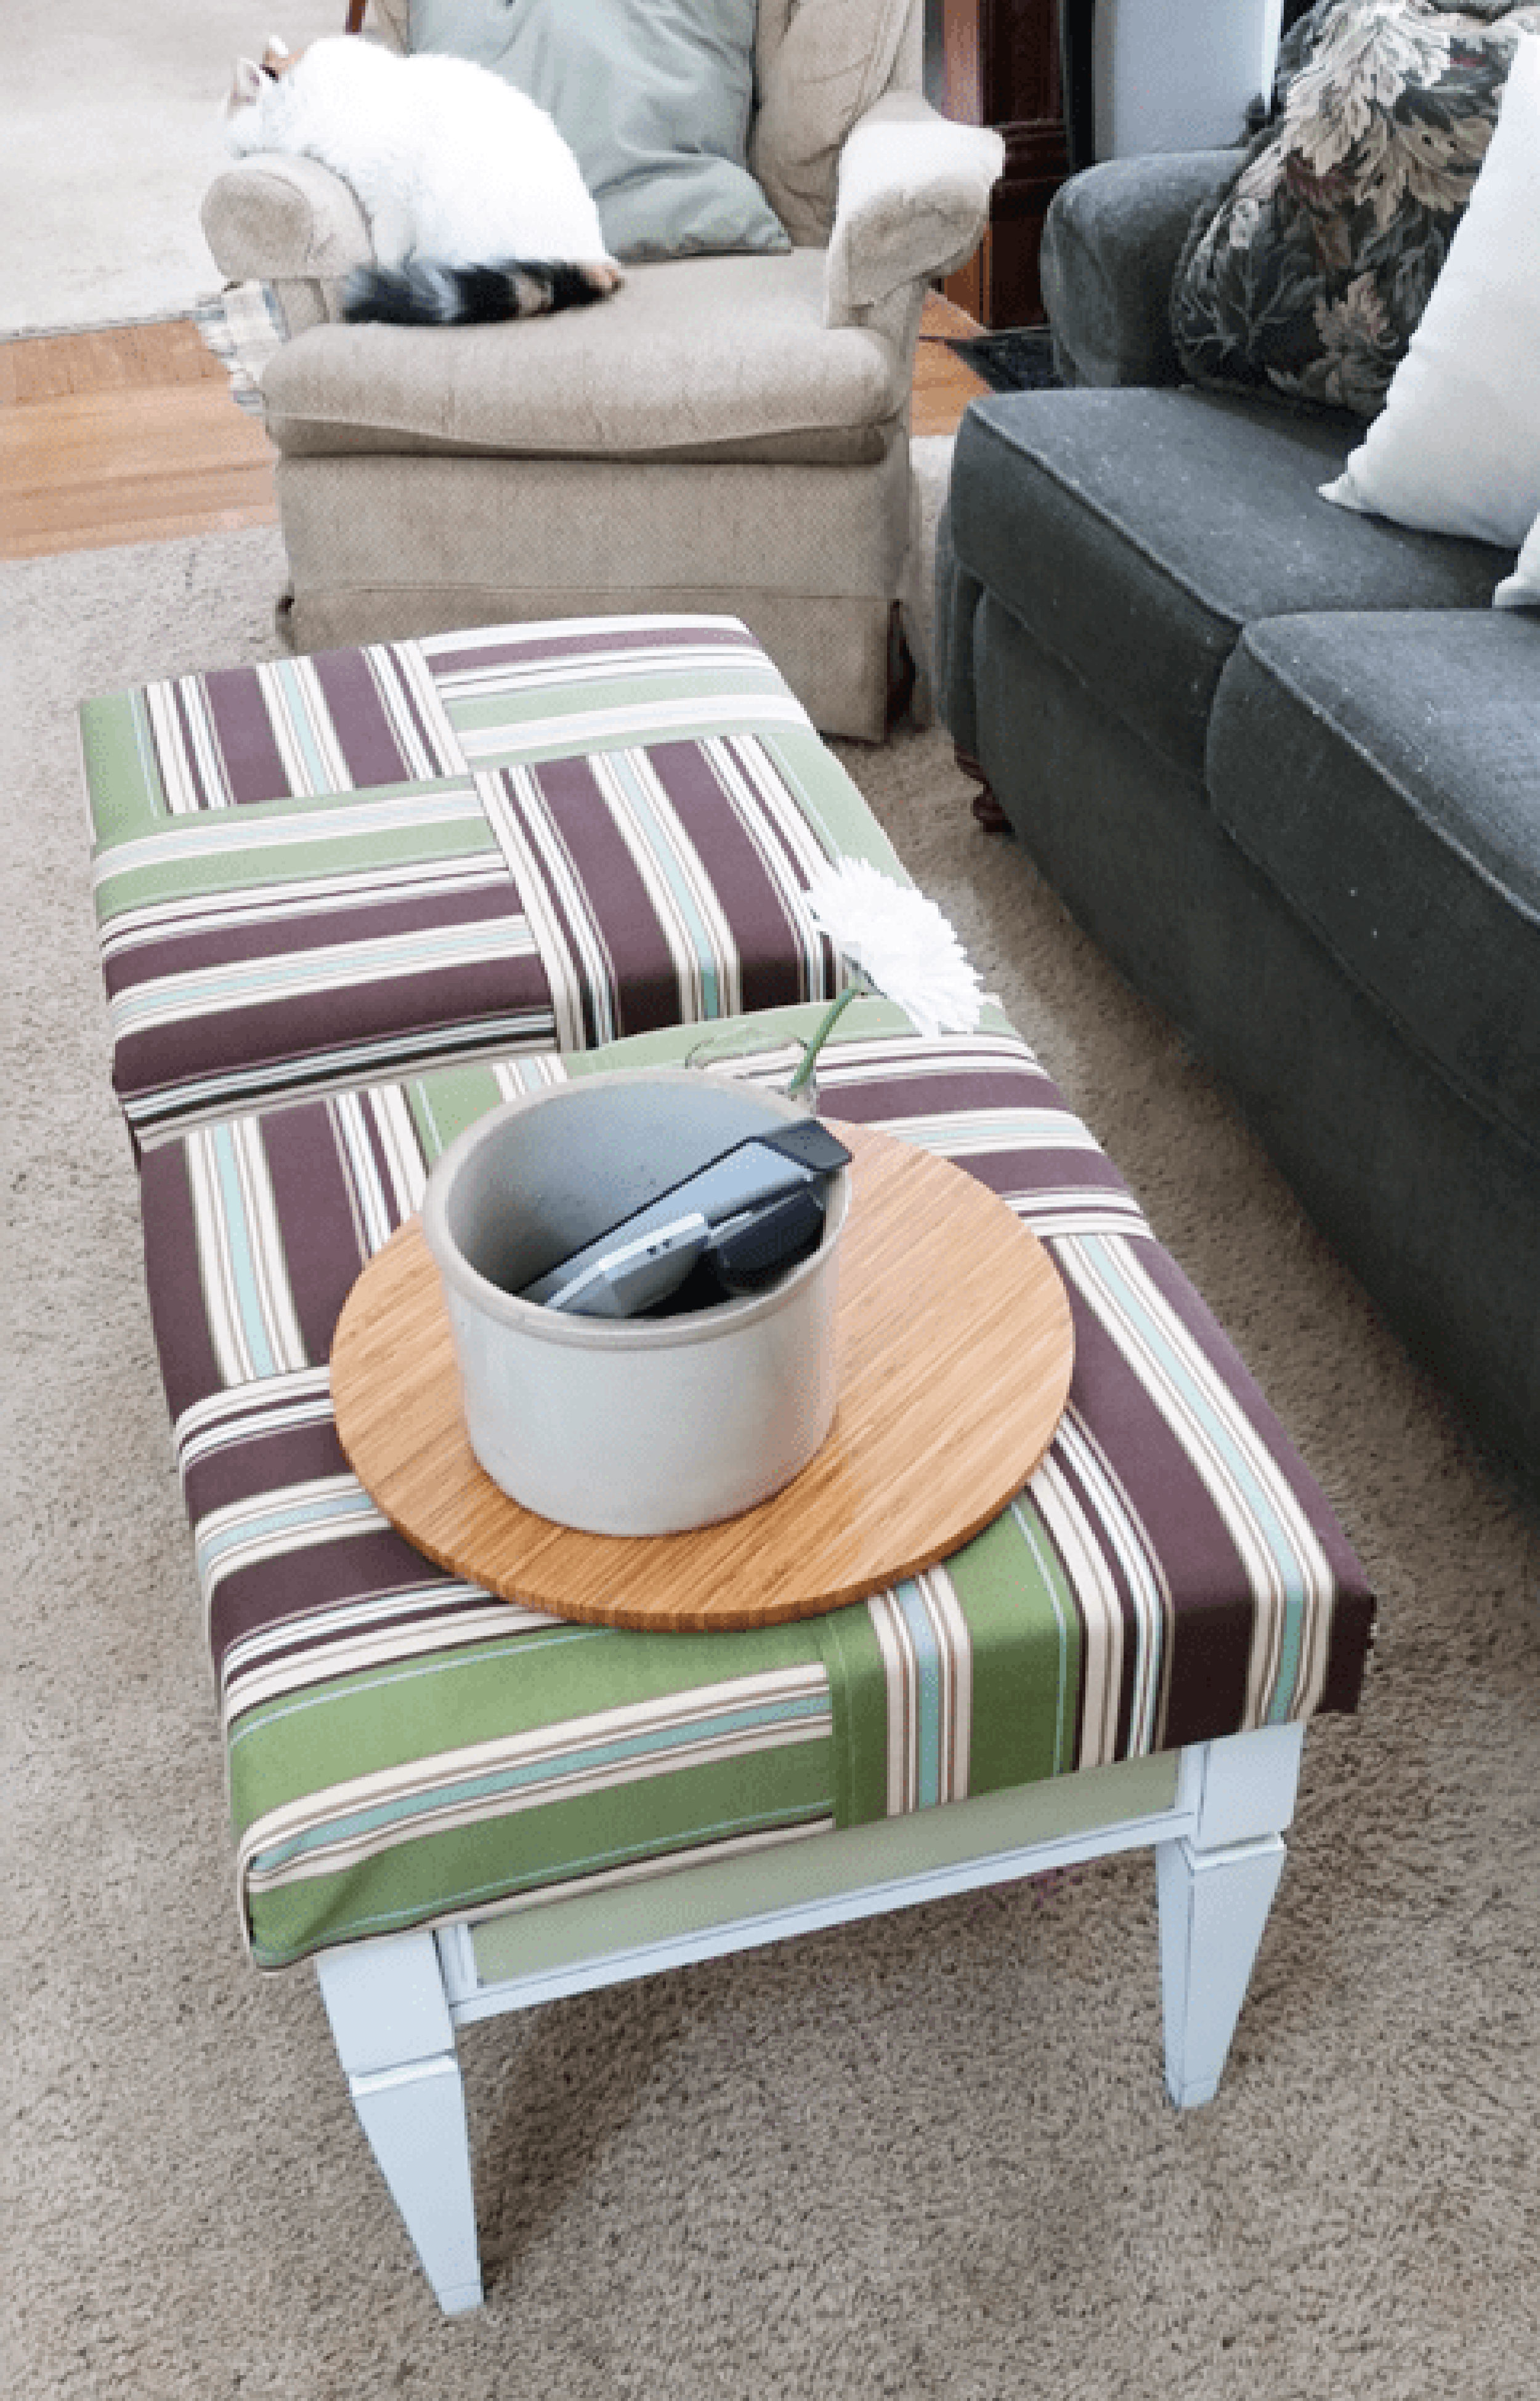 Ottoman Doubling as Coffee Table